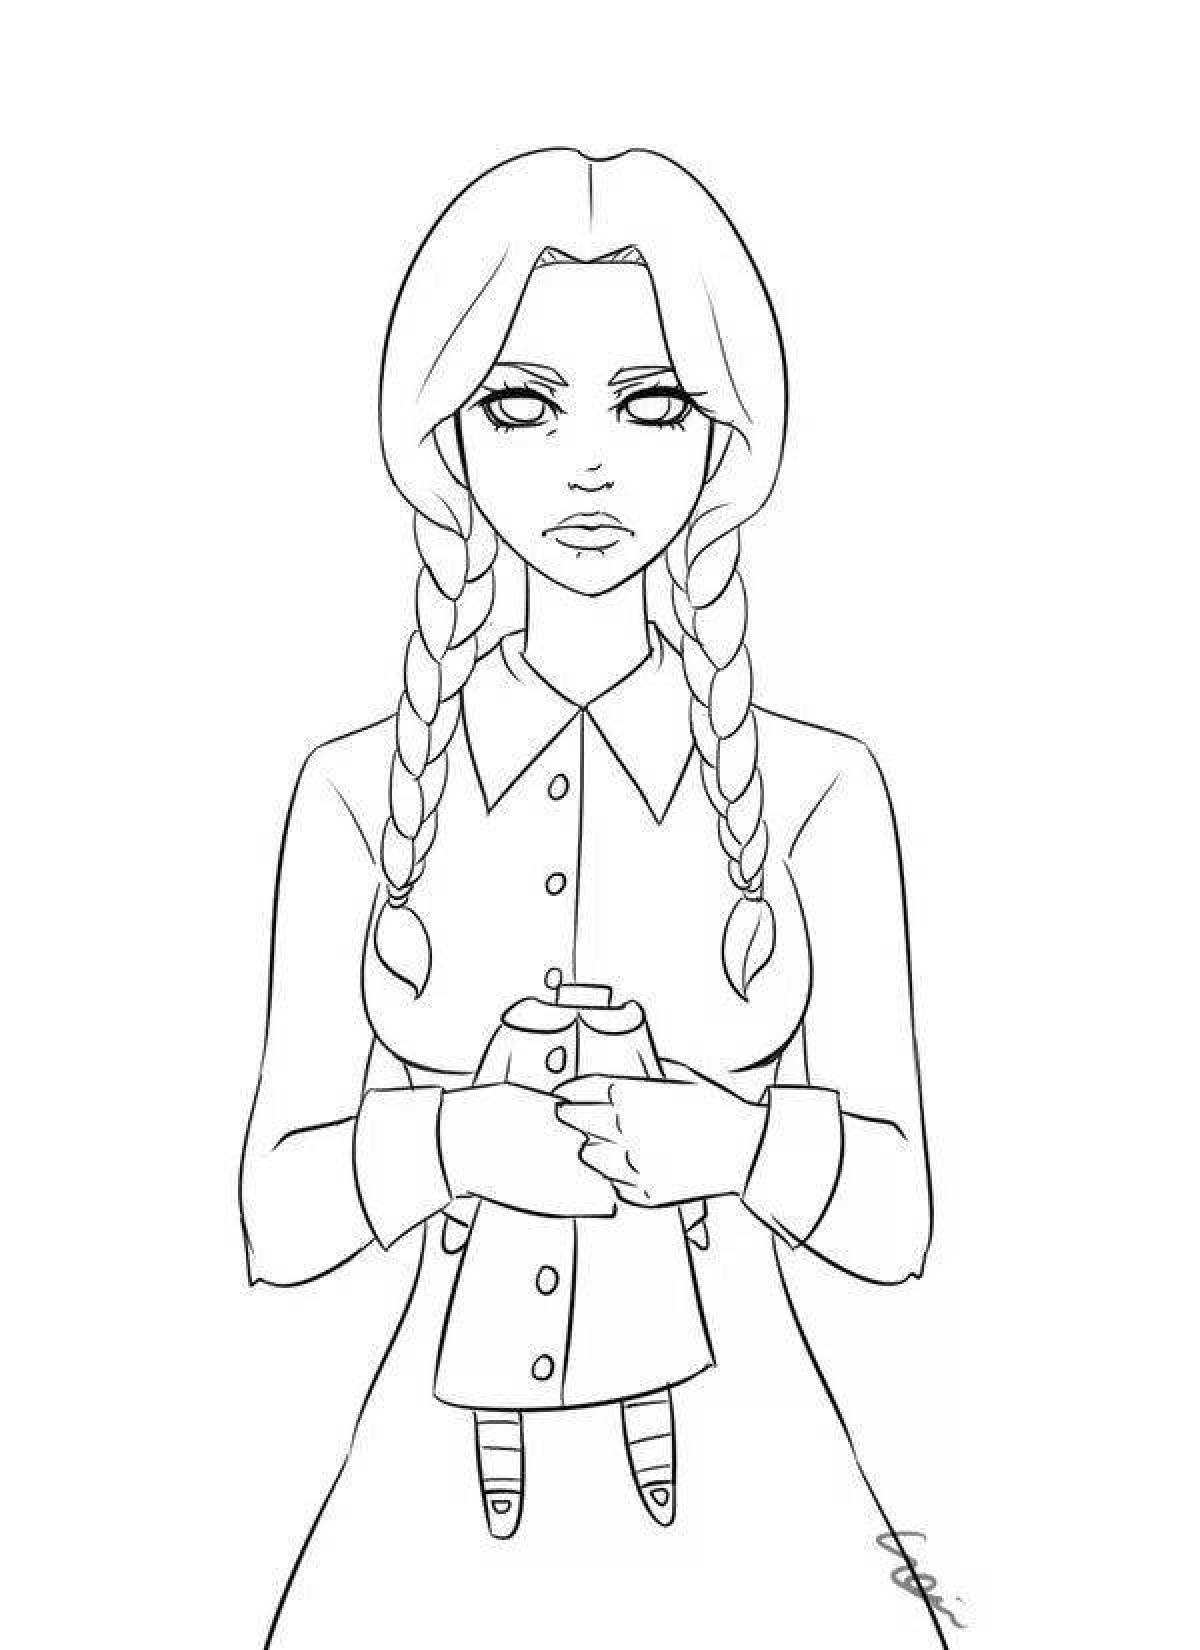 Exciting wednesday addams coloring page